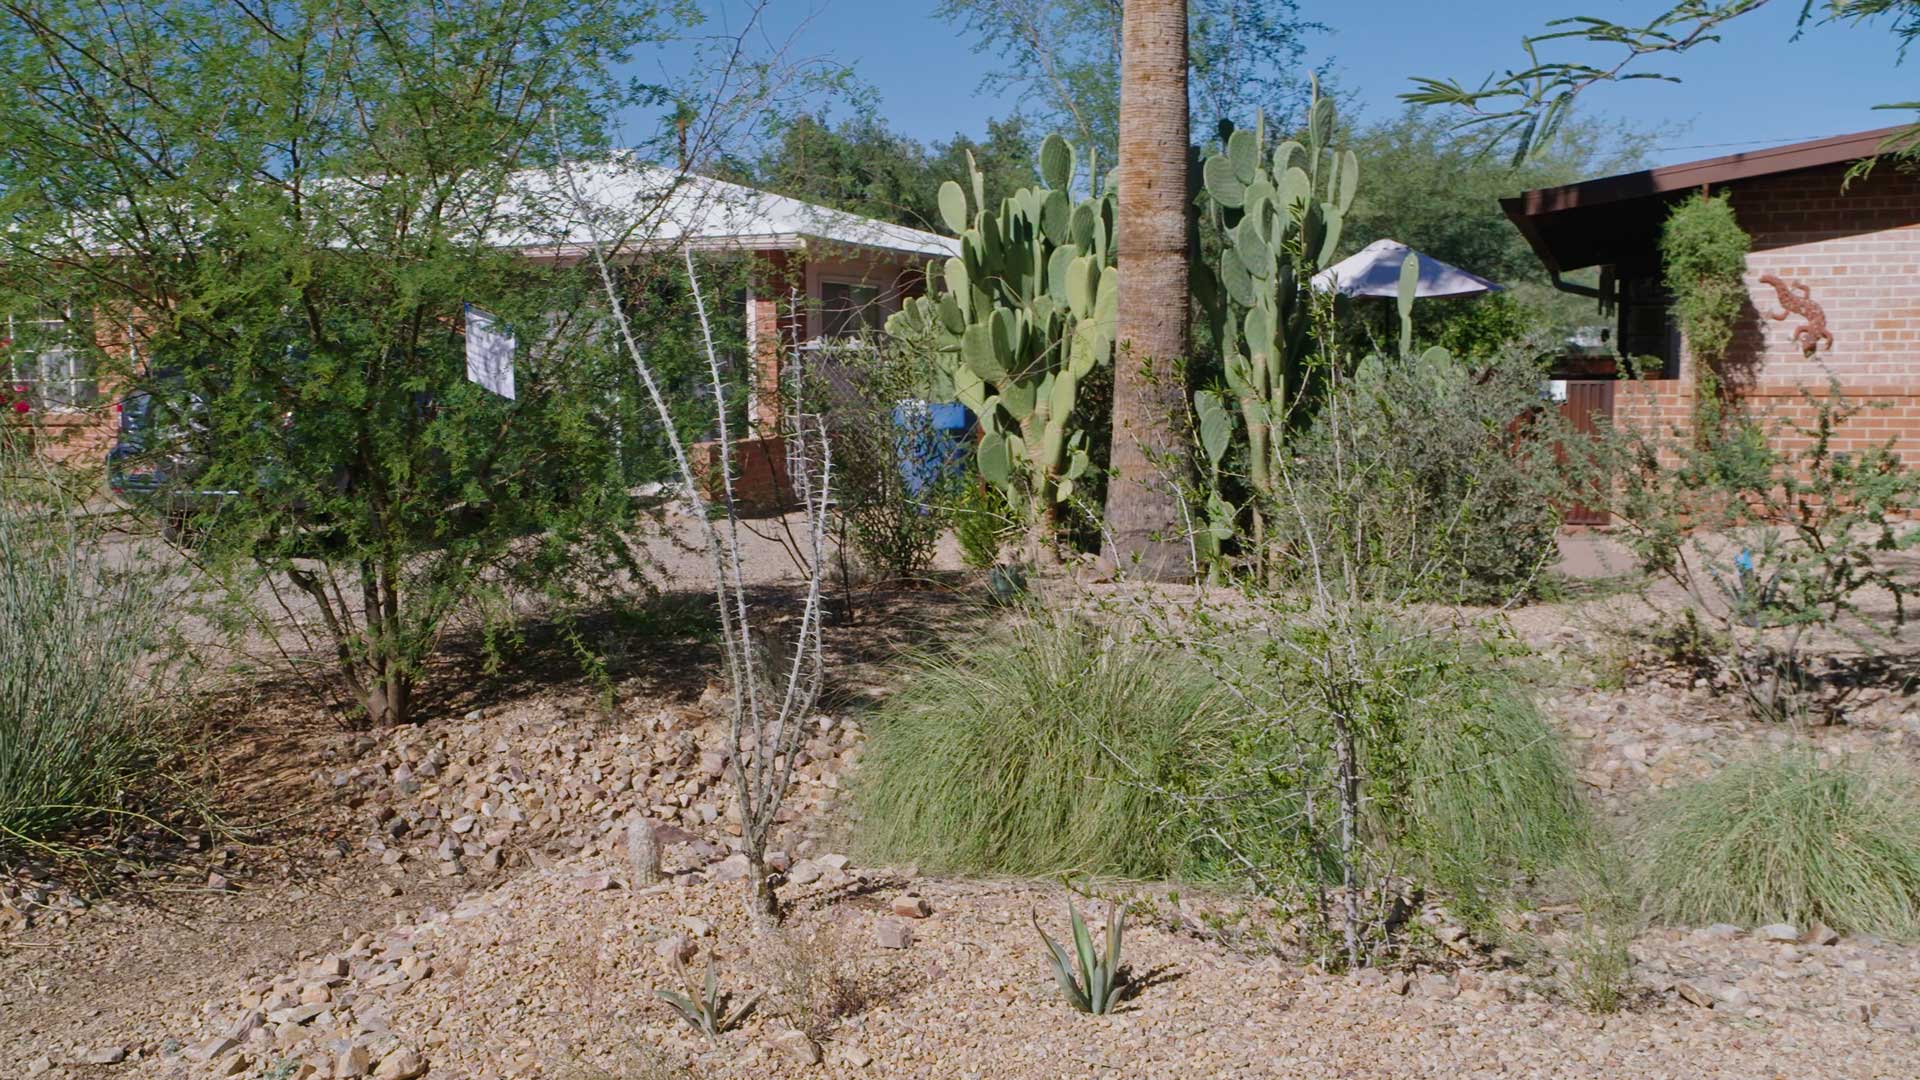 Watershed Management Group recently hosted its 12th Annual Desert Living Home Tour. 